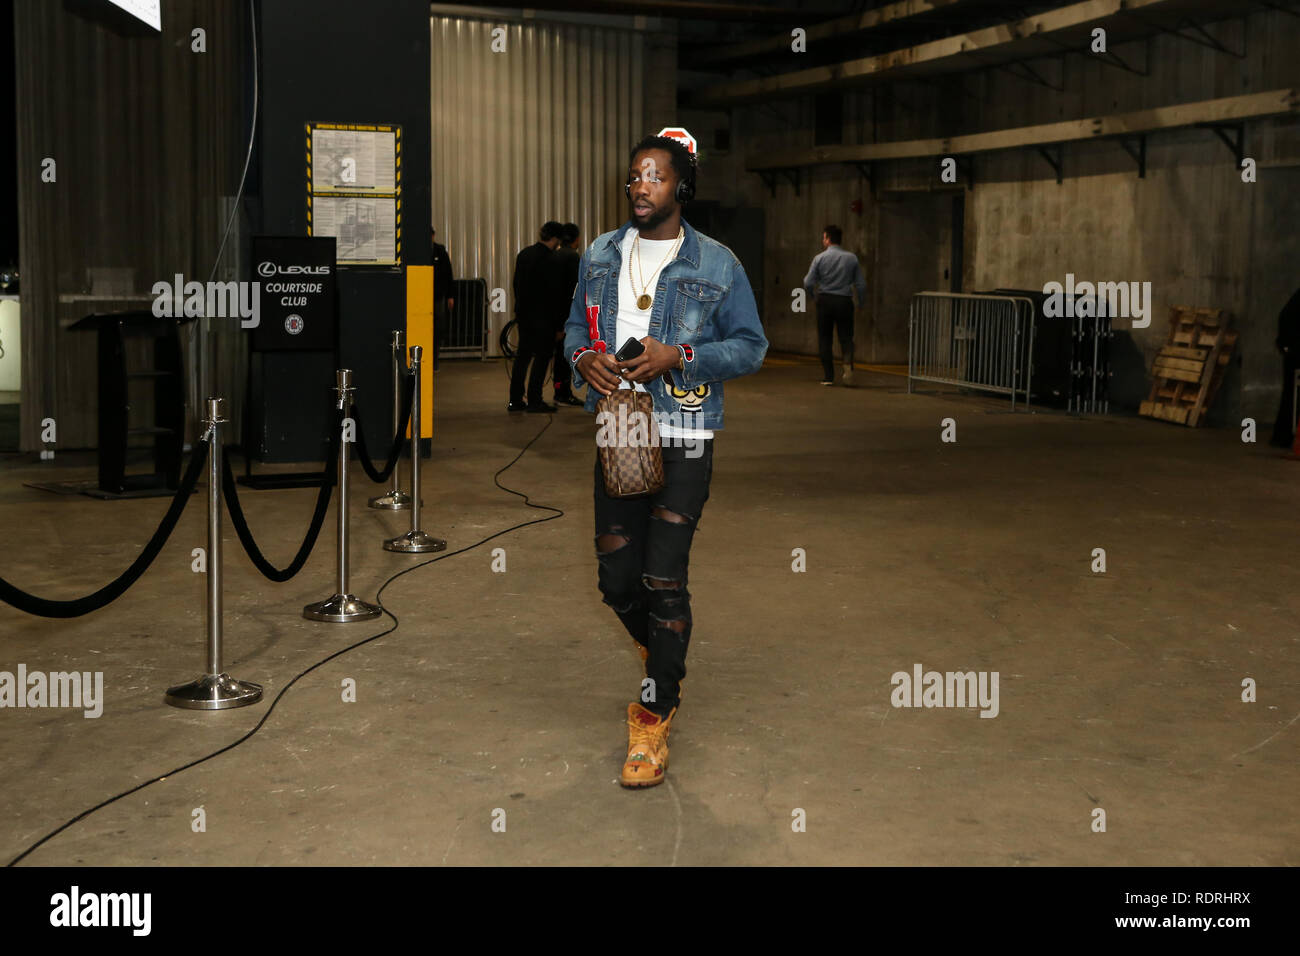 Los Angeles, CA, USA. 18th Jan, 2019. LA Clippers guard Patrick Beverley #21 before the Golden State Warriors vs Los Angeles Clippers at Staples Center on January 18, 2019. (Photo by Jevone Moore) Credit: csm/Alamy Live News Stock Photo